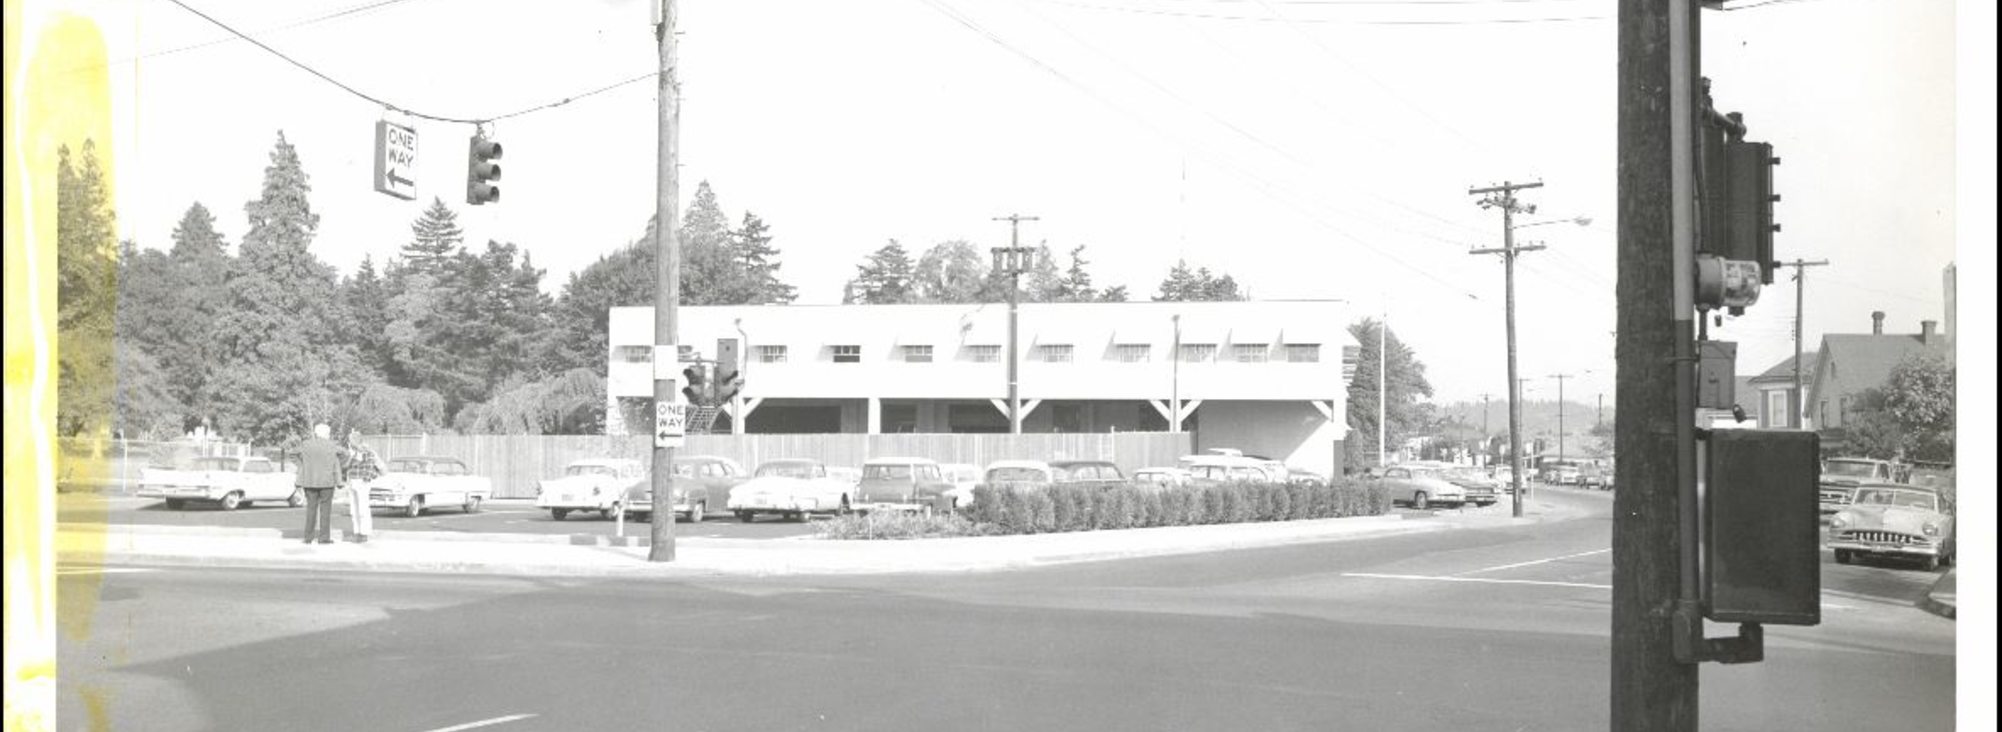 Black-and-white historic photo from 1961 showing the Morrison Building that was constructed on Block 14 in the 1950s and eventually removed.